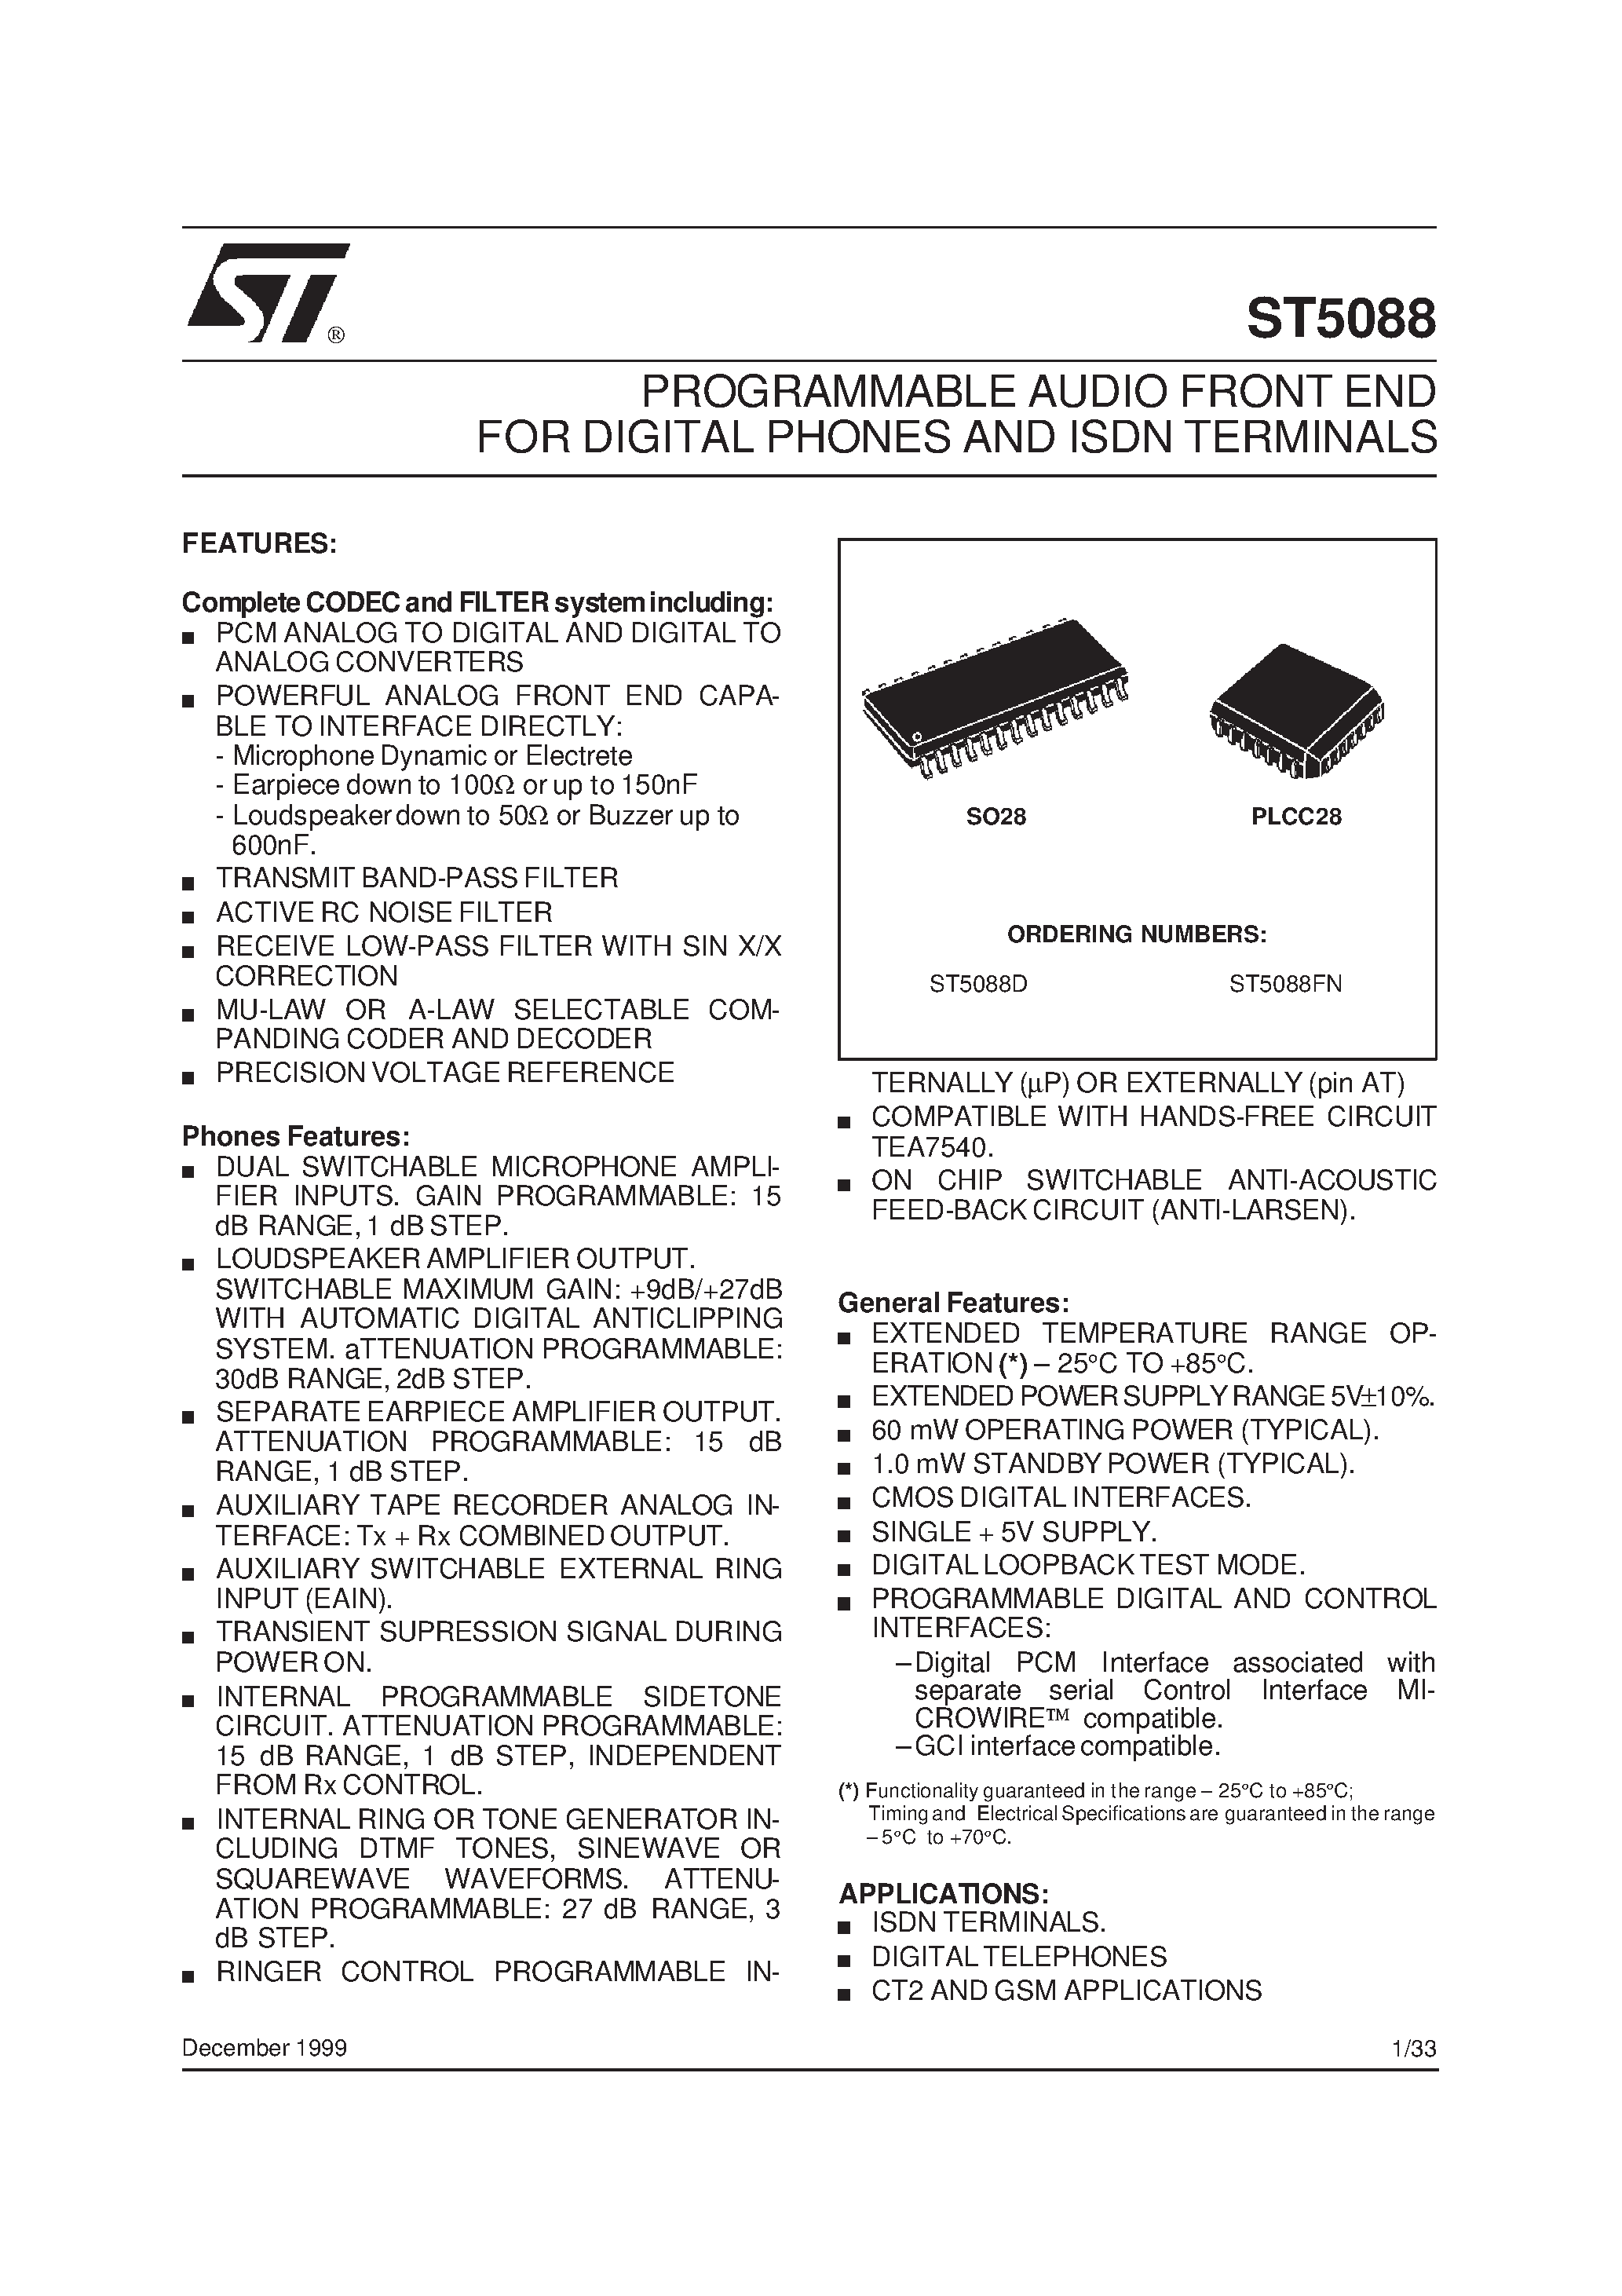 Даташит ST5088 - PROGRAMMABLE AUDIO FRONT END FOR DIGITAL PHONES AND ISDN TERMINALS страница 1